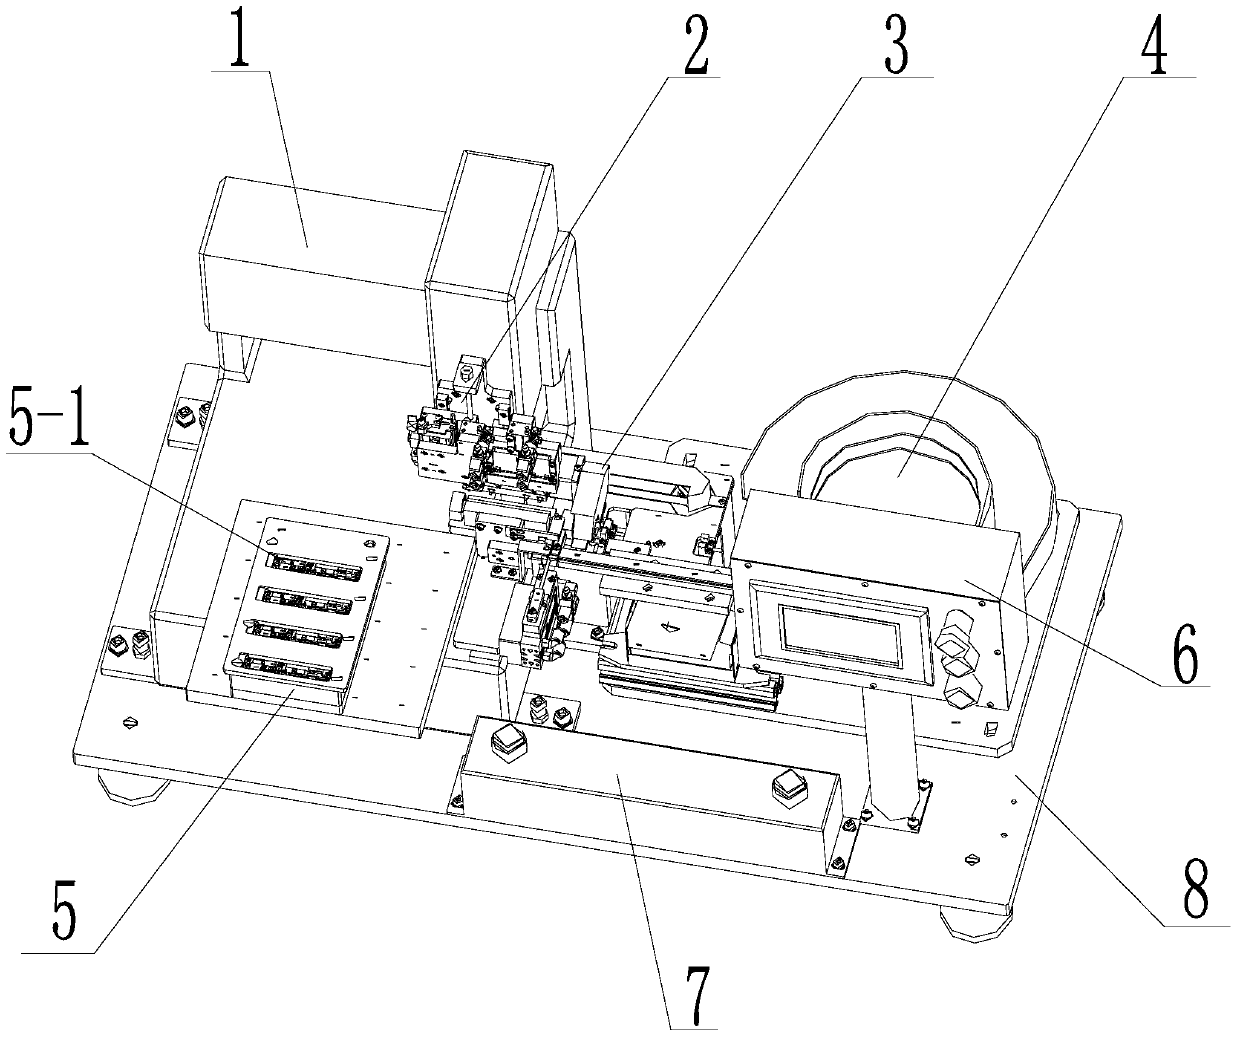 An automatic installation device for acoustic module shrapnel